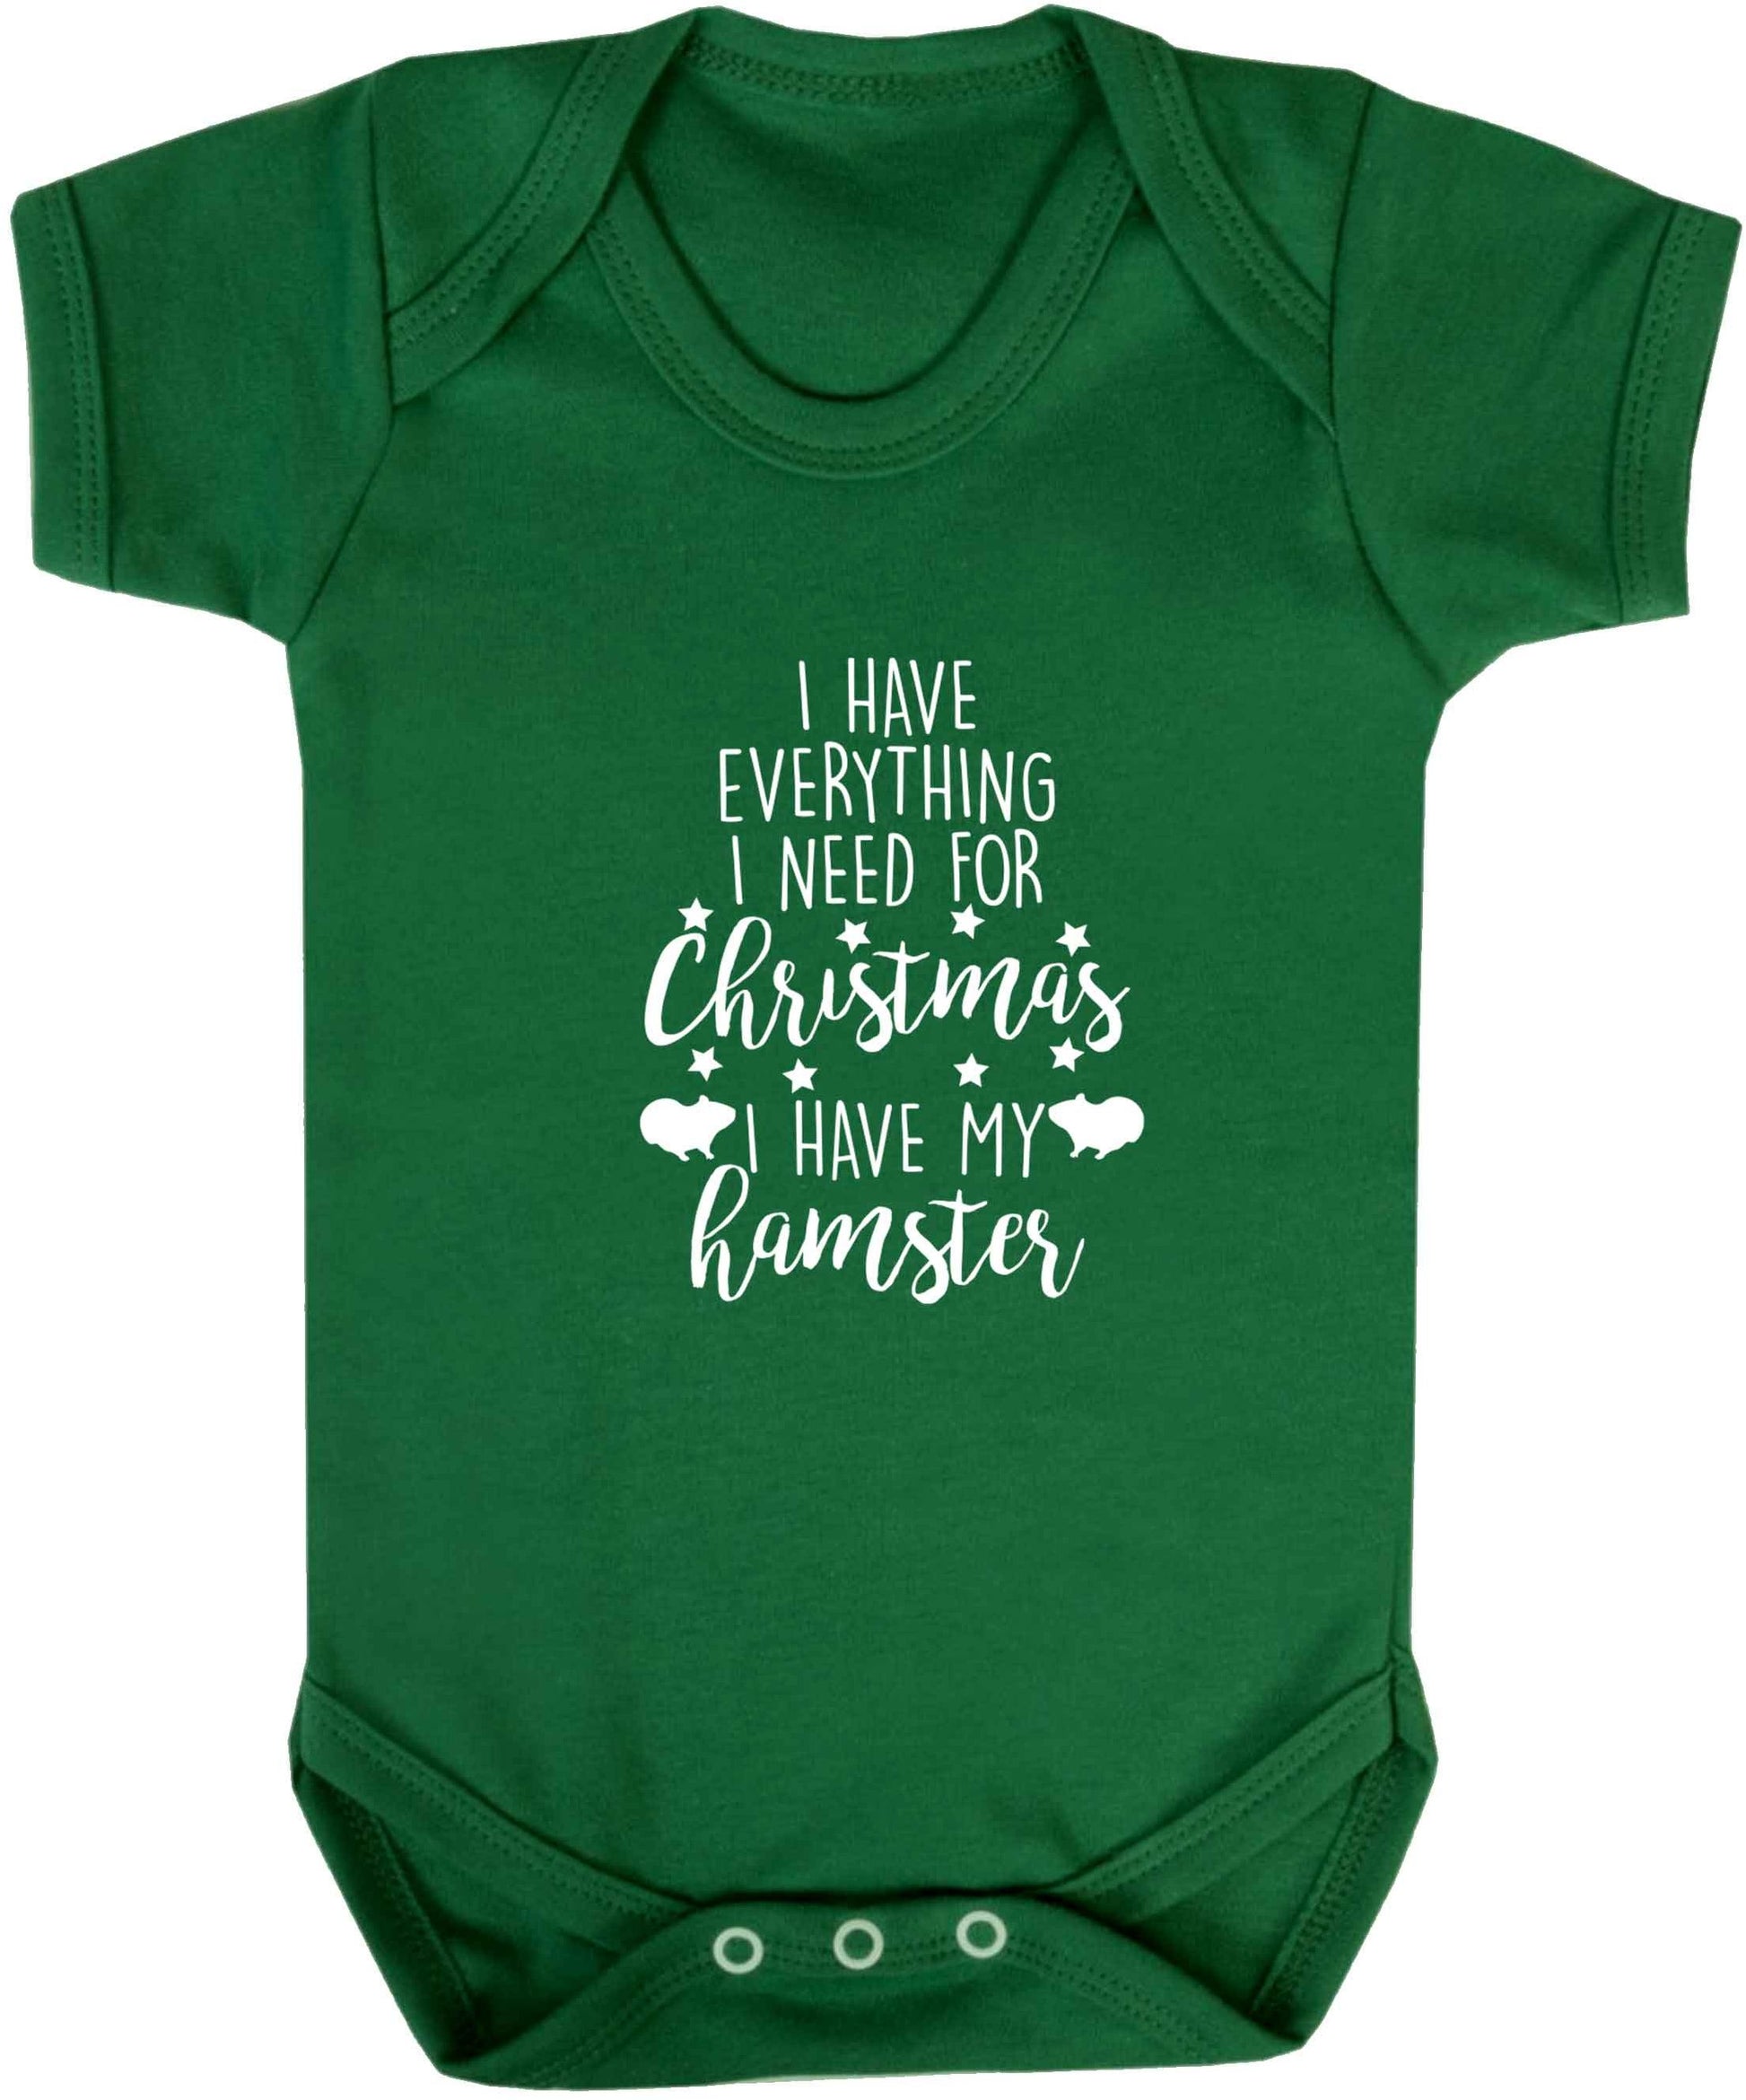 I have everything I need for Christmas I have my hamster baby vest green 18-24 months